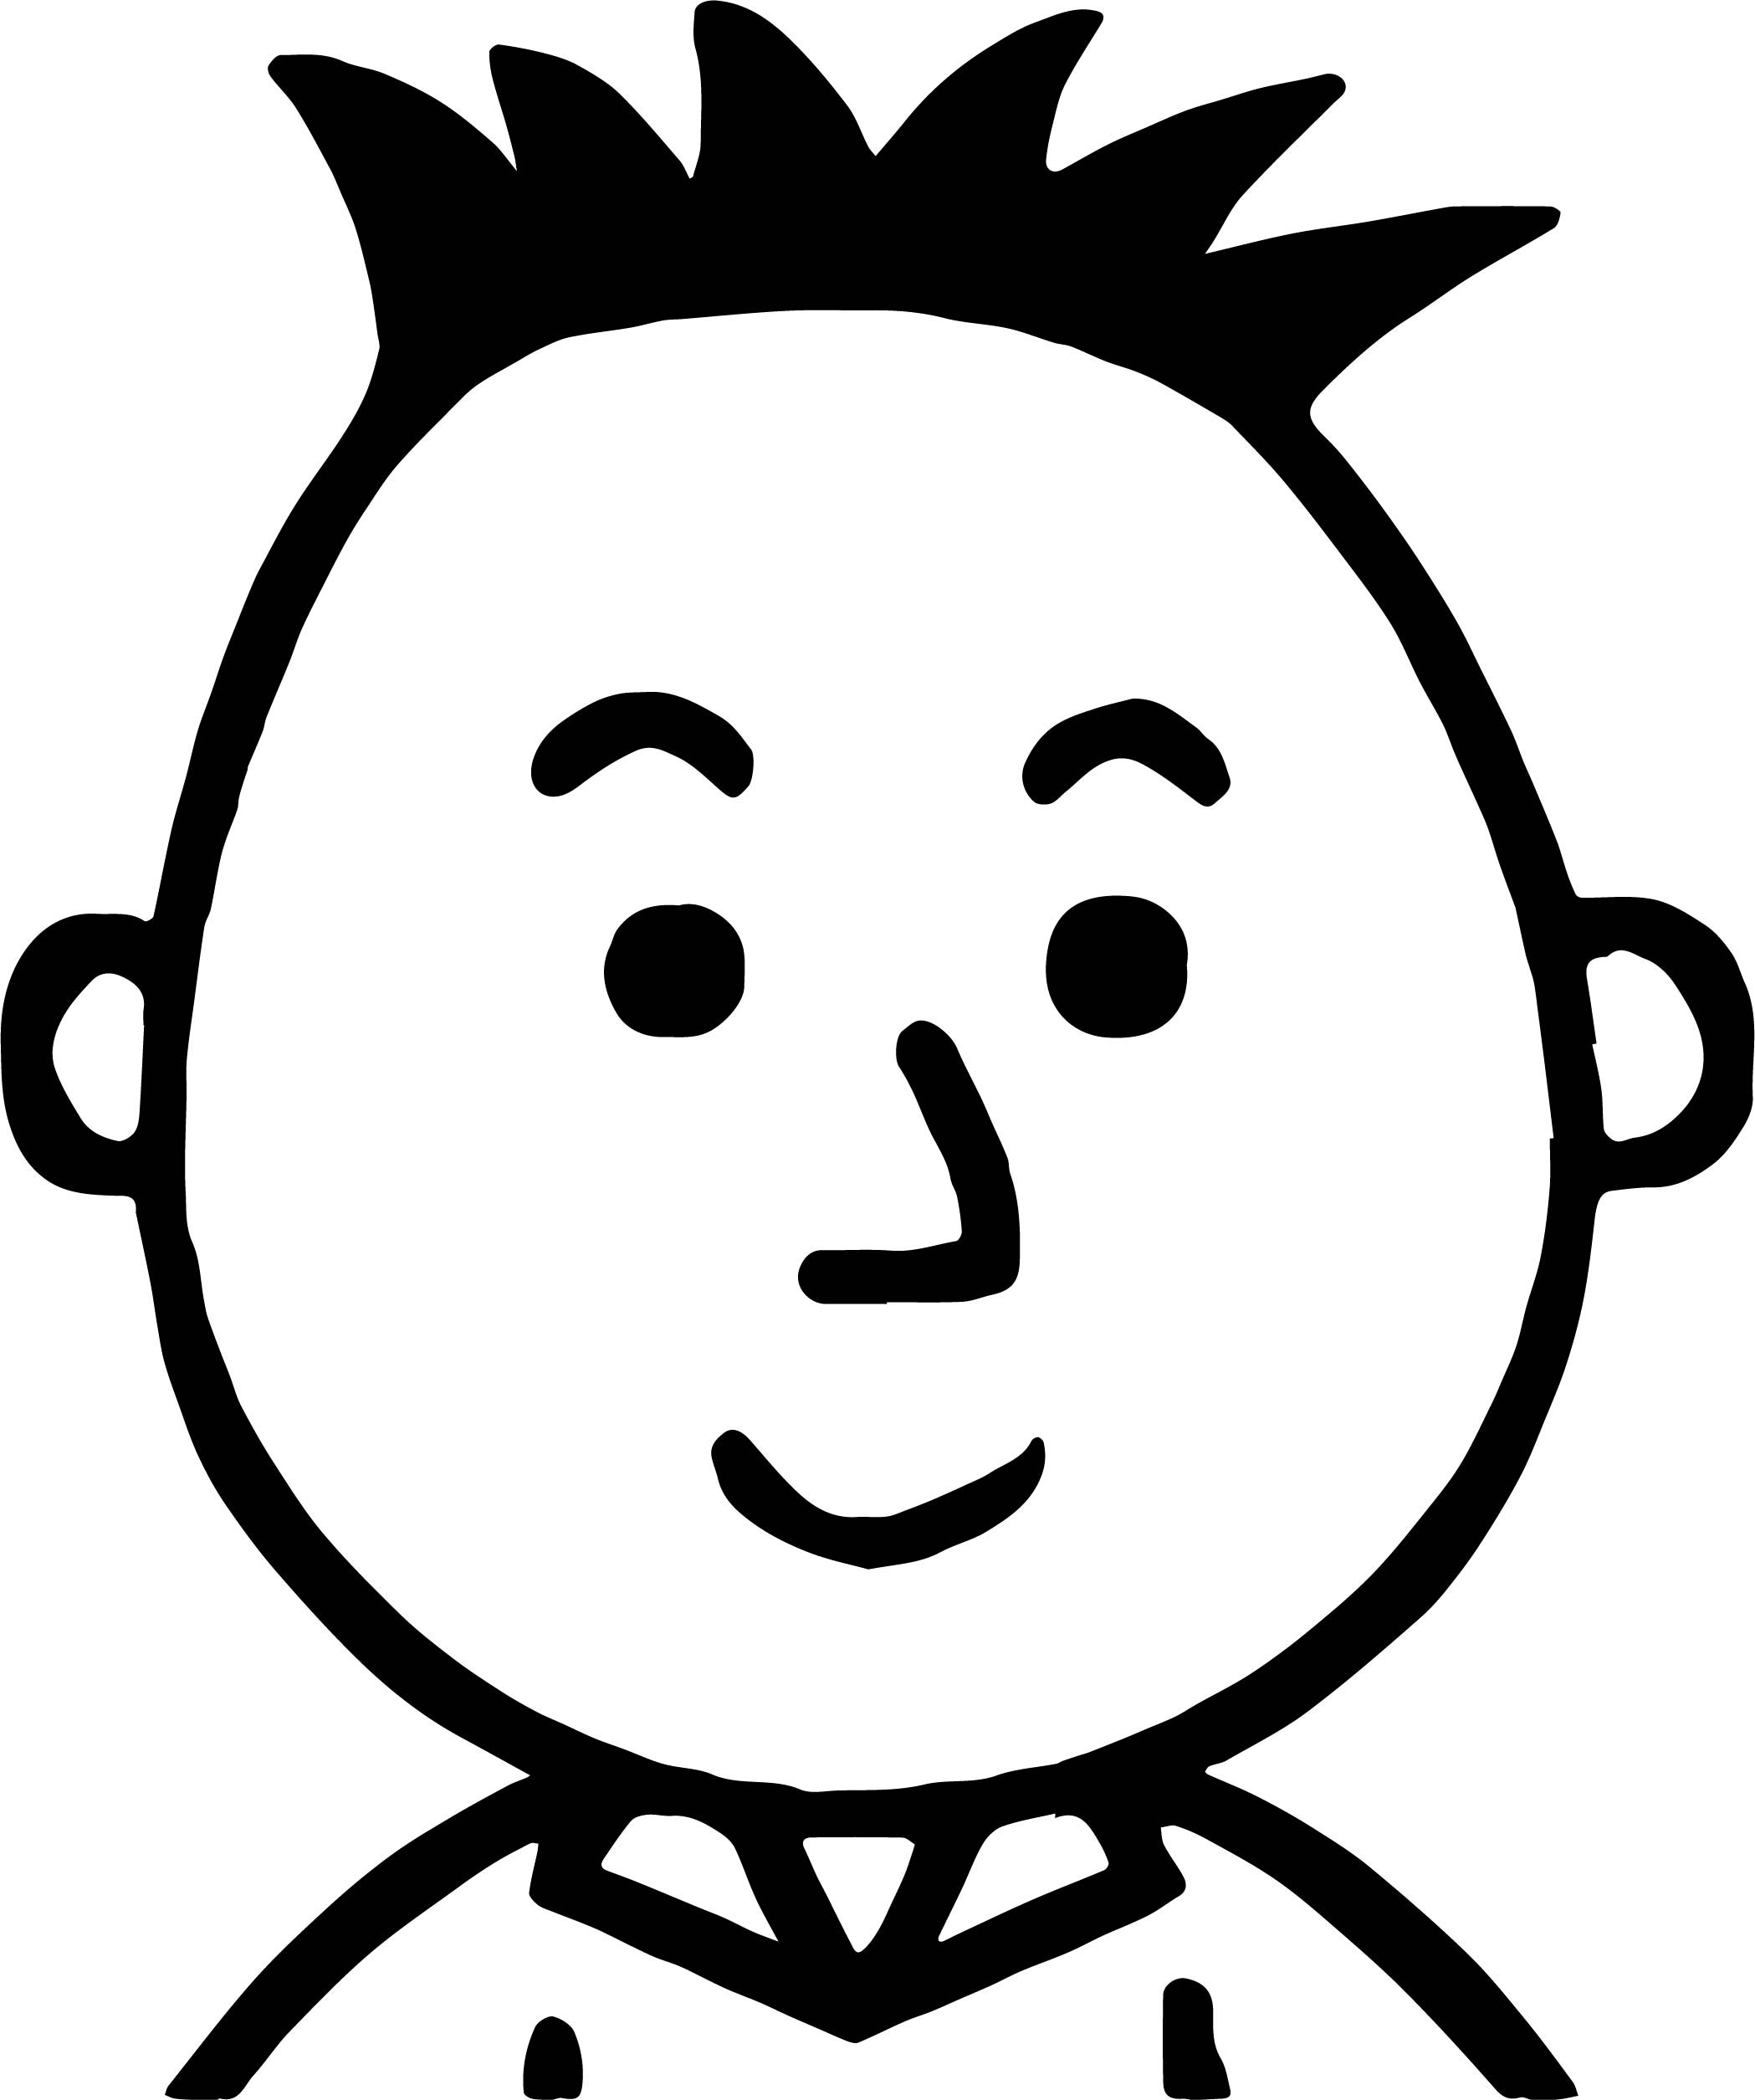 Boys Face Coloring Pages
 Cute Boy Face Coloring Coloring Pages